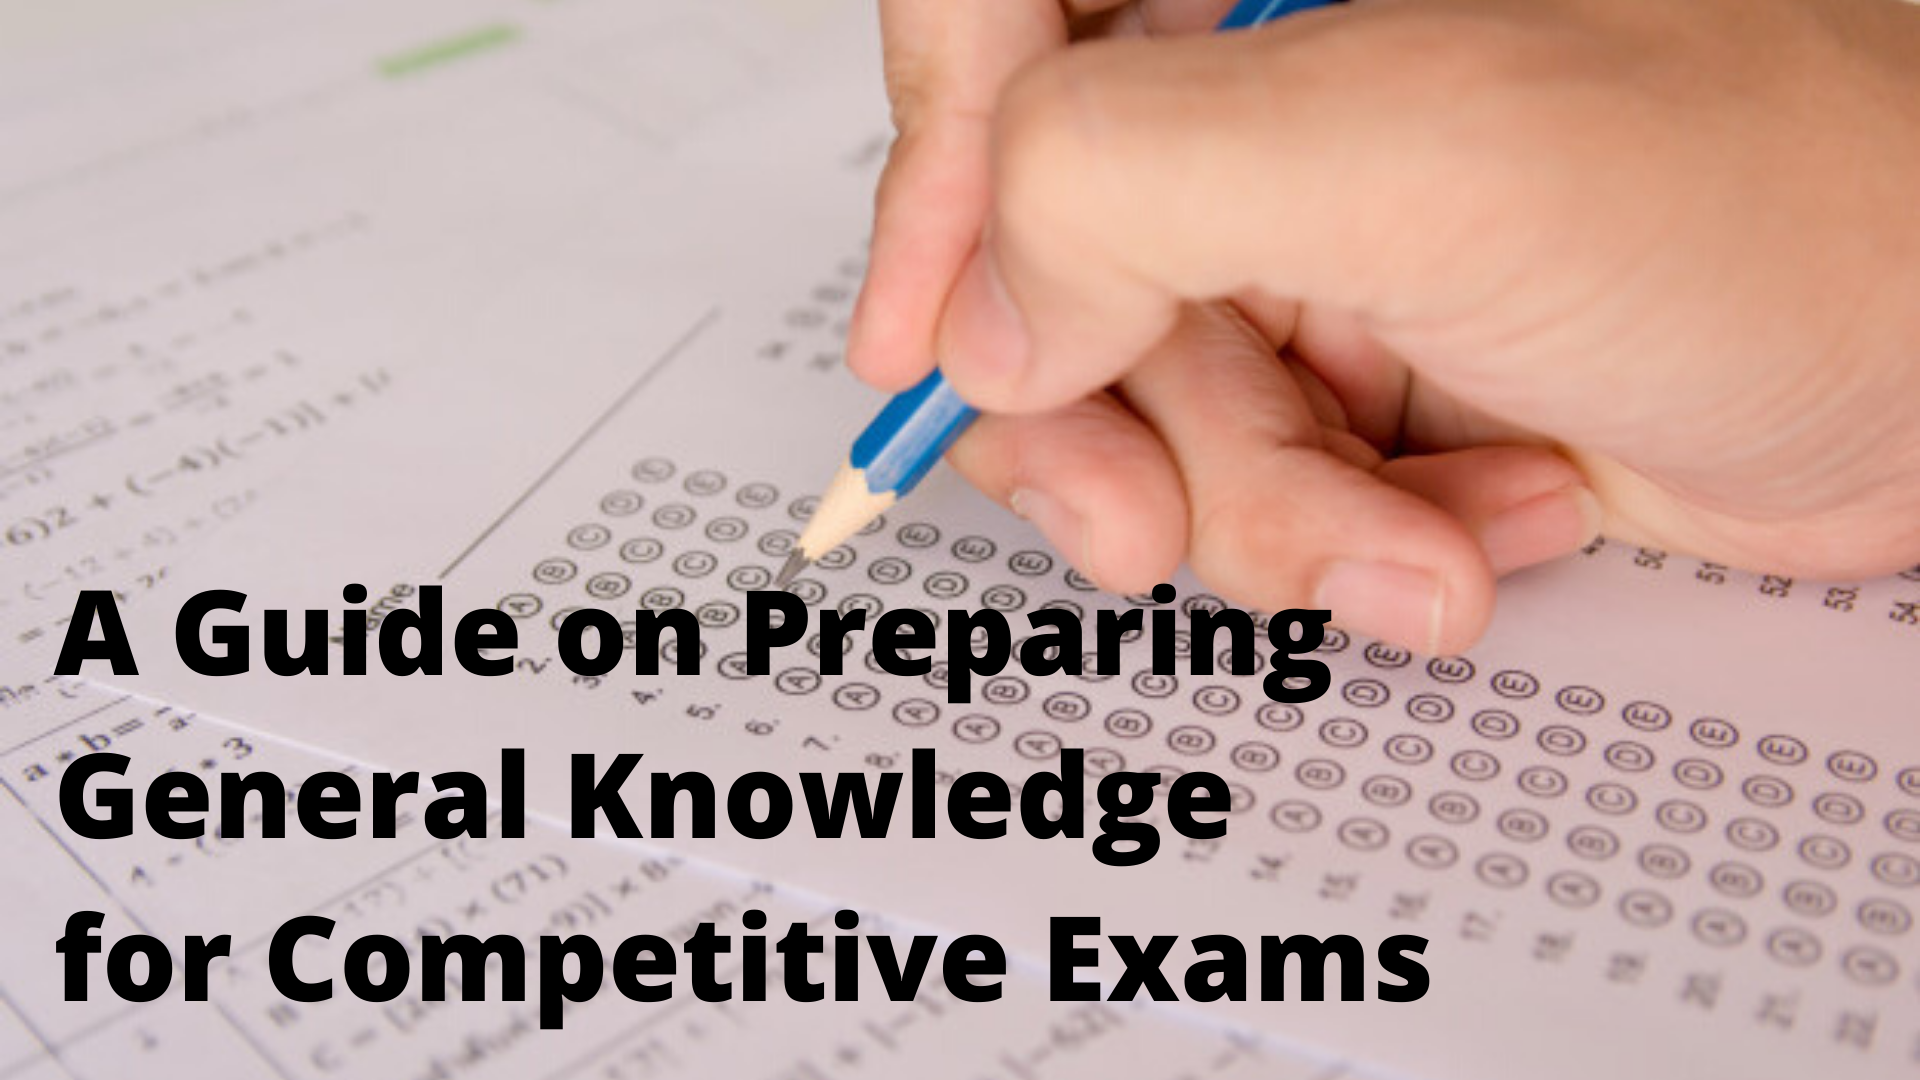 A Guide on Preparing General Knowledge for Competitive Exams